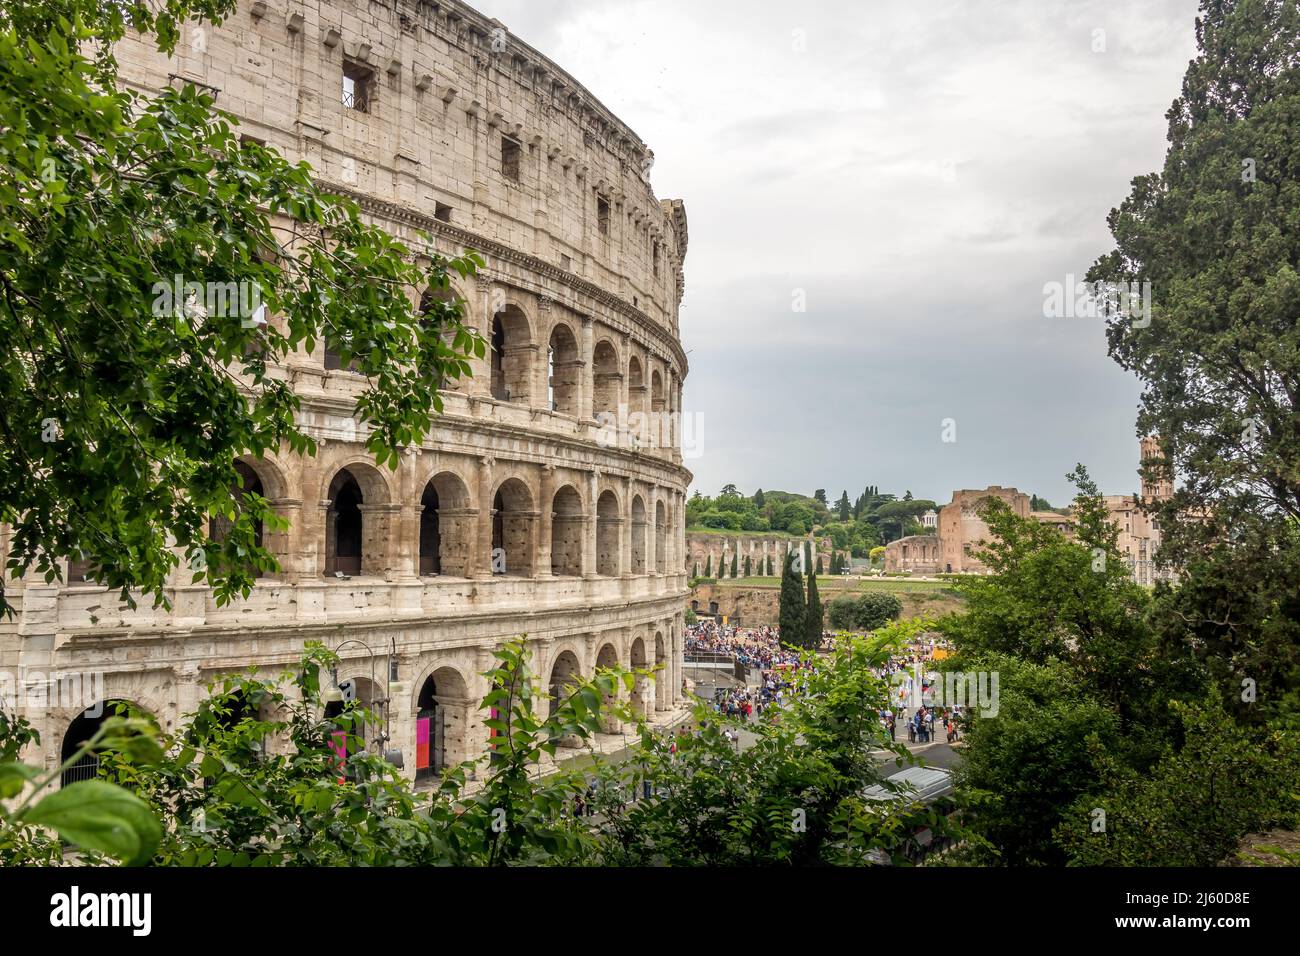 Roman Colosseum at Day under cloudy skies in City of Rome, Italy 01 Stock Photo